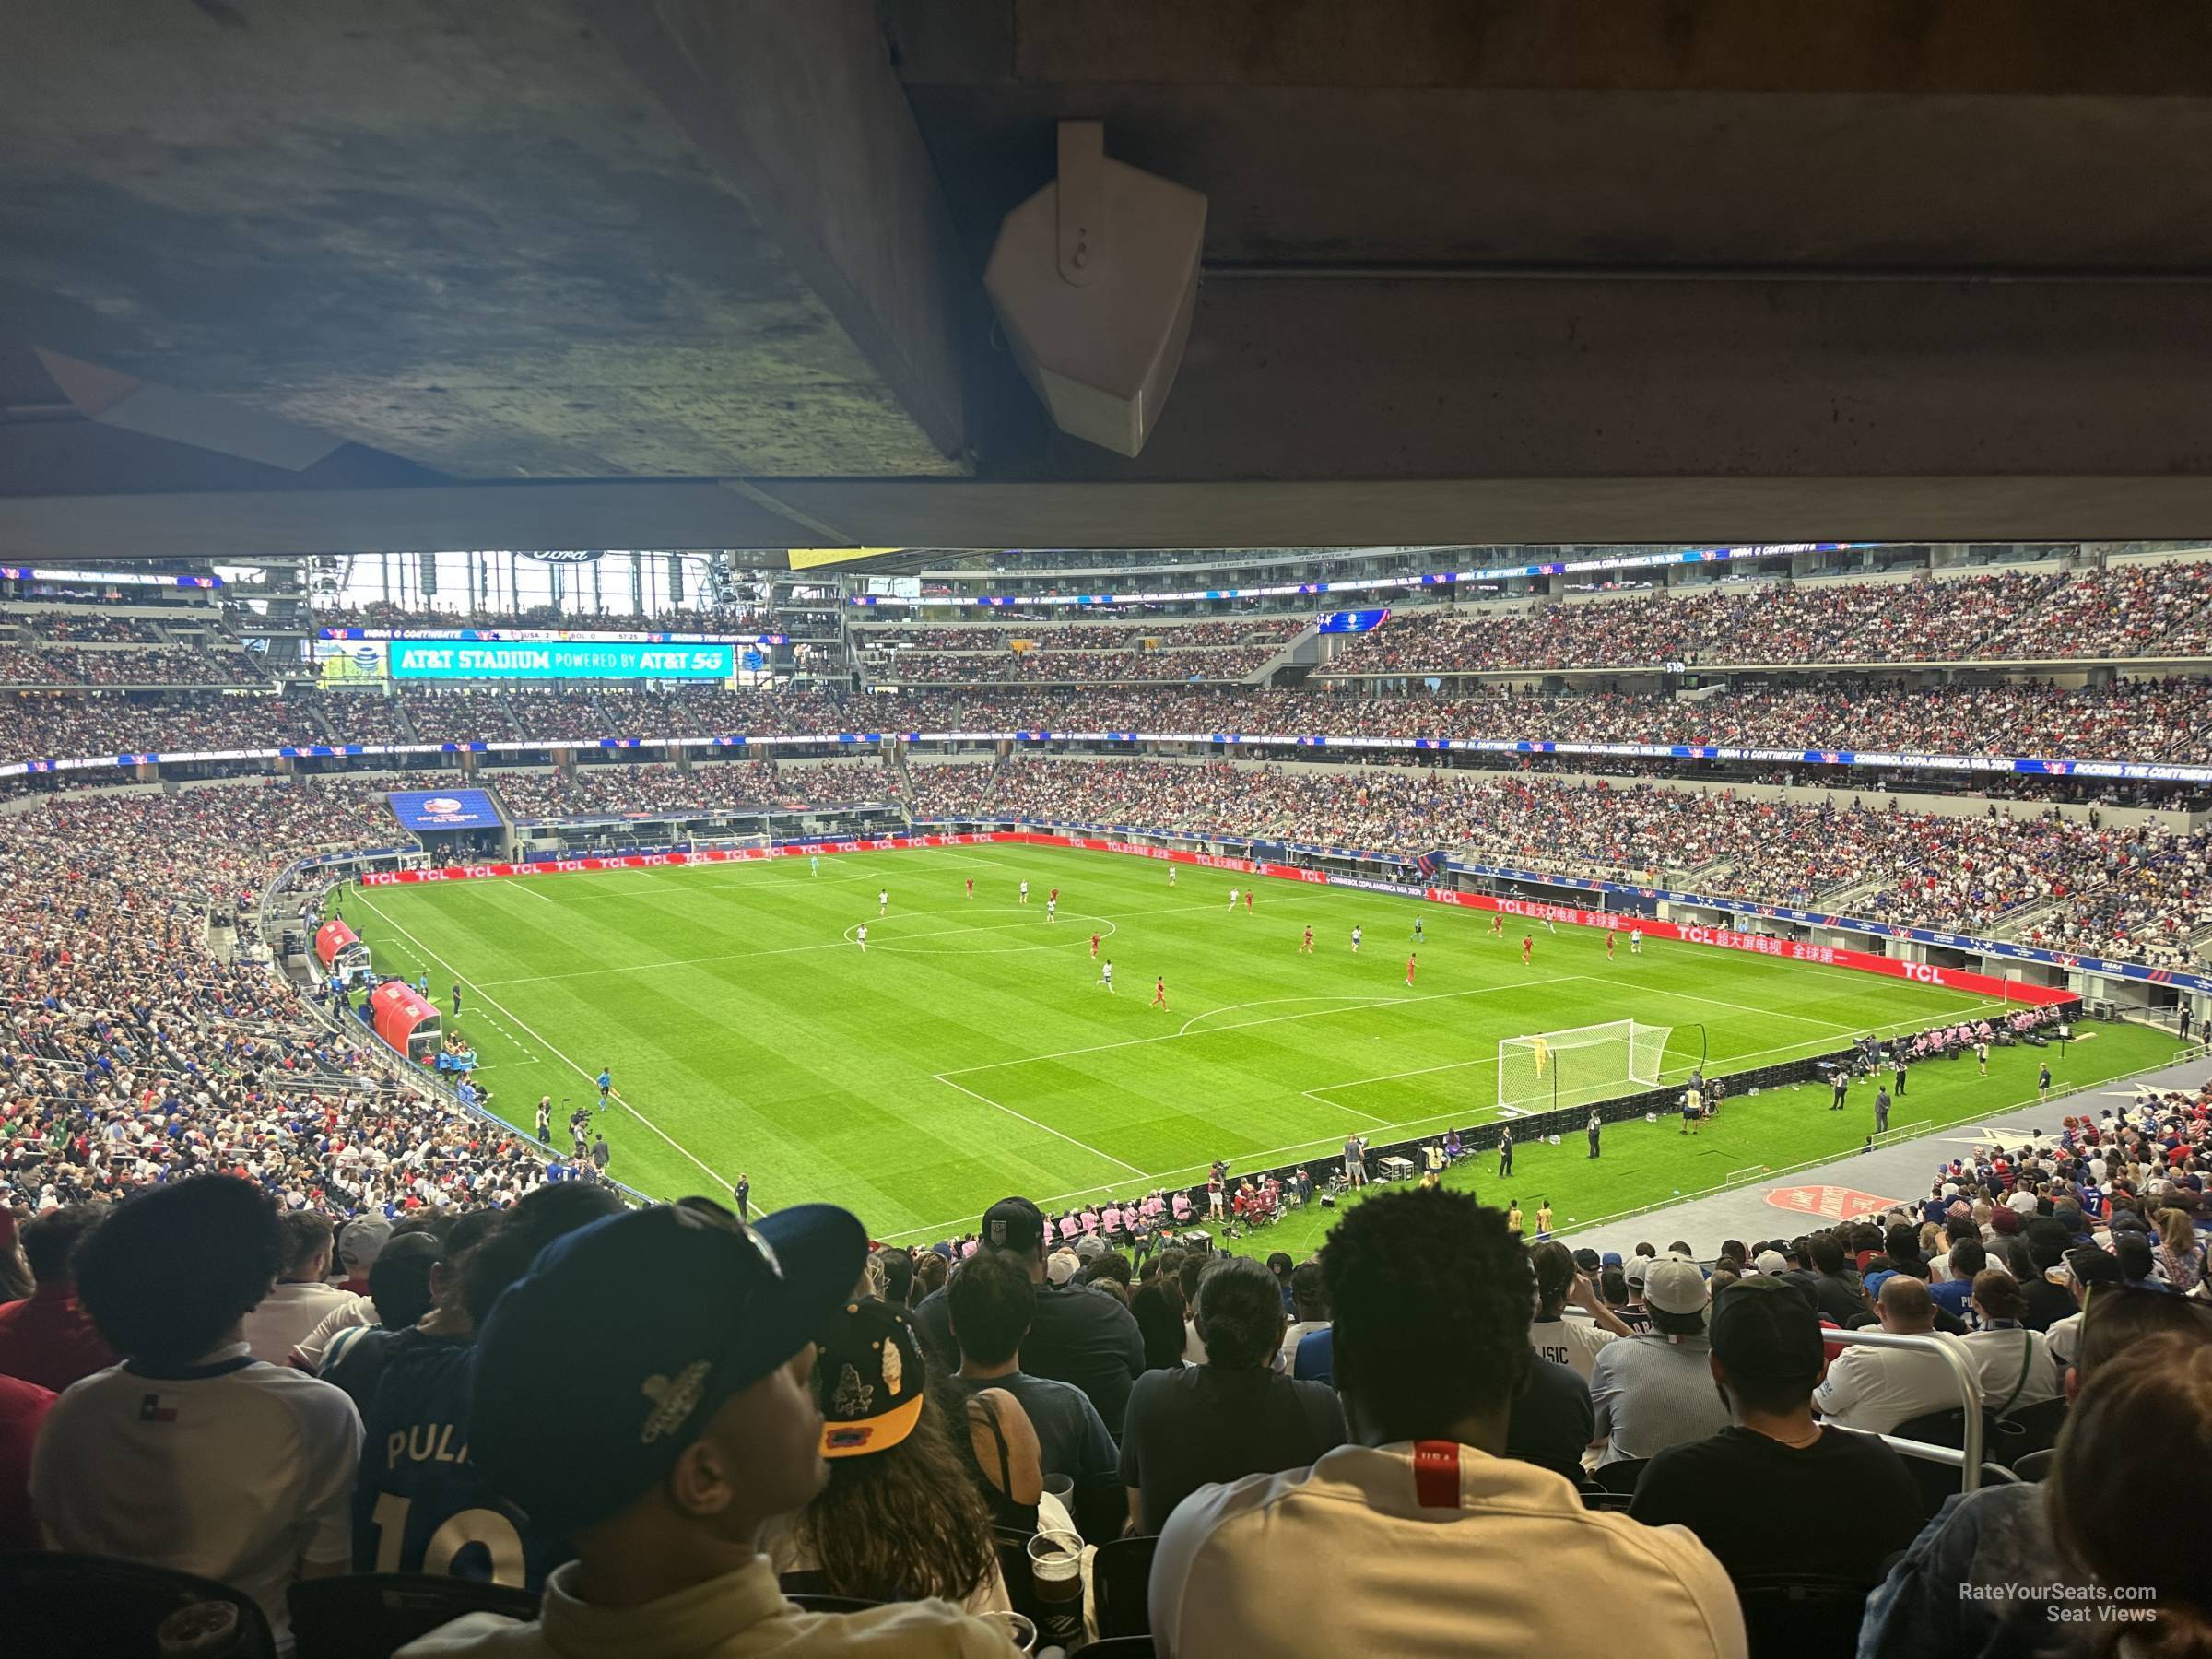 section 227, row 15 seat view  for soccer - at&t stadium (cowboys stadium)